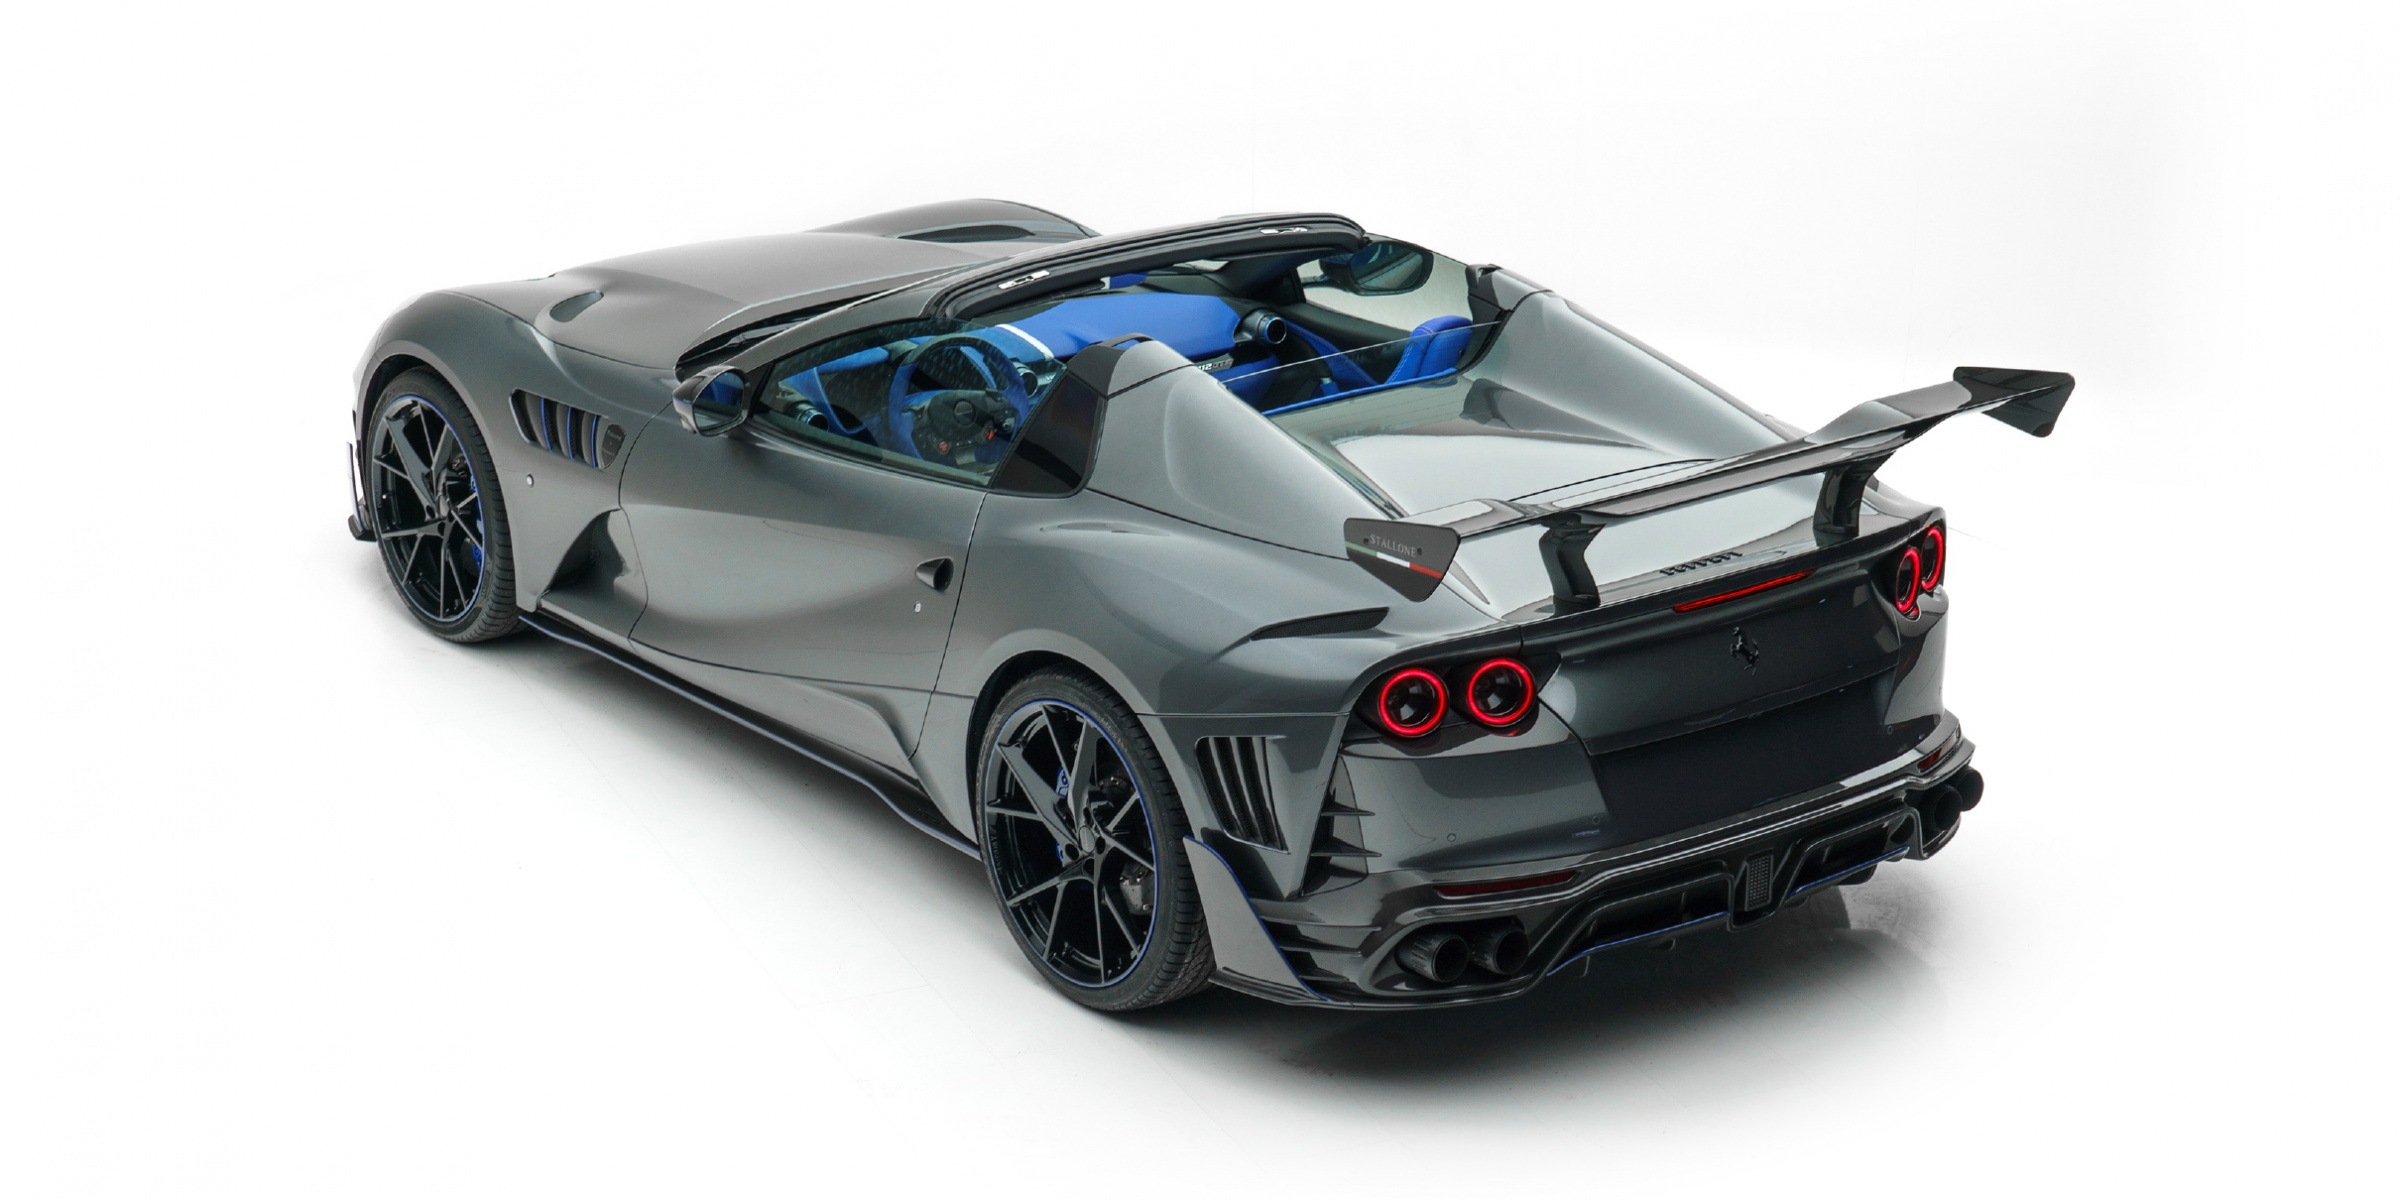 Mansory Stallone Wallpapers